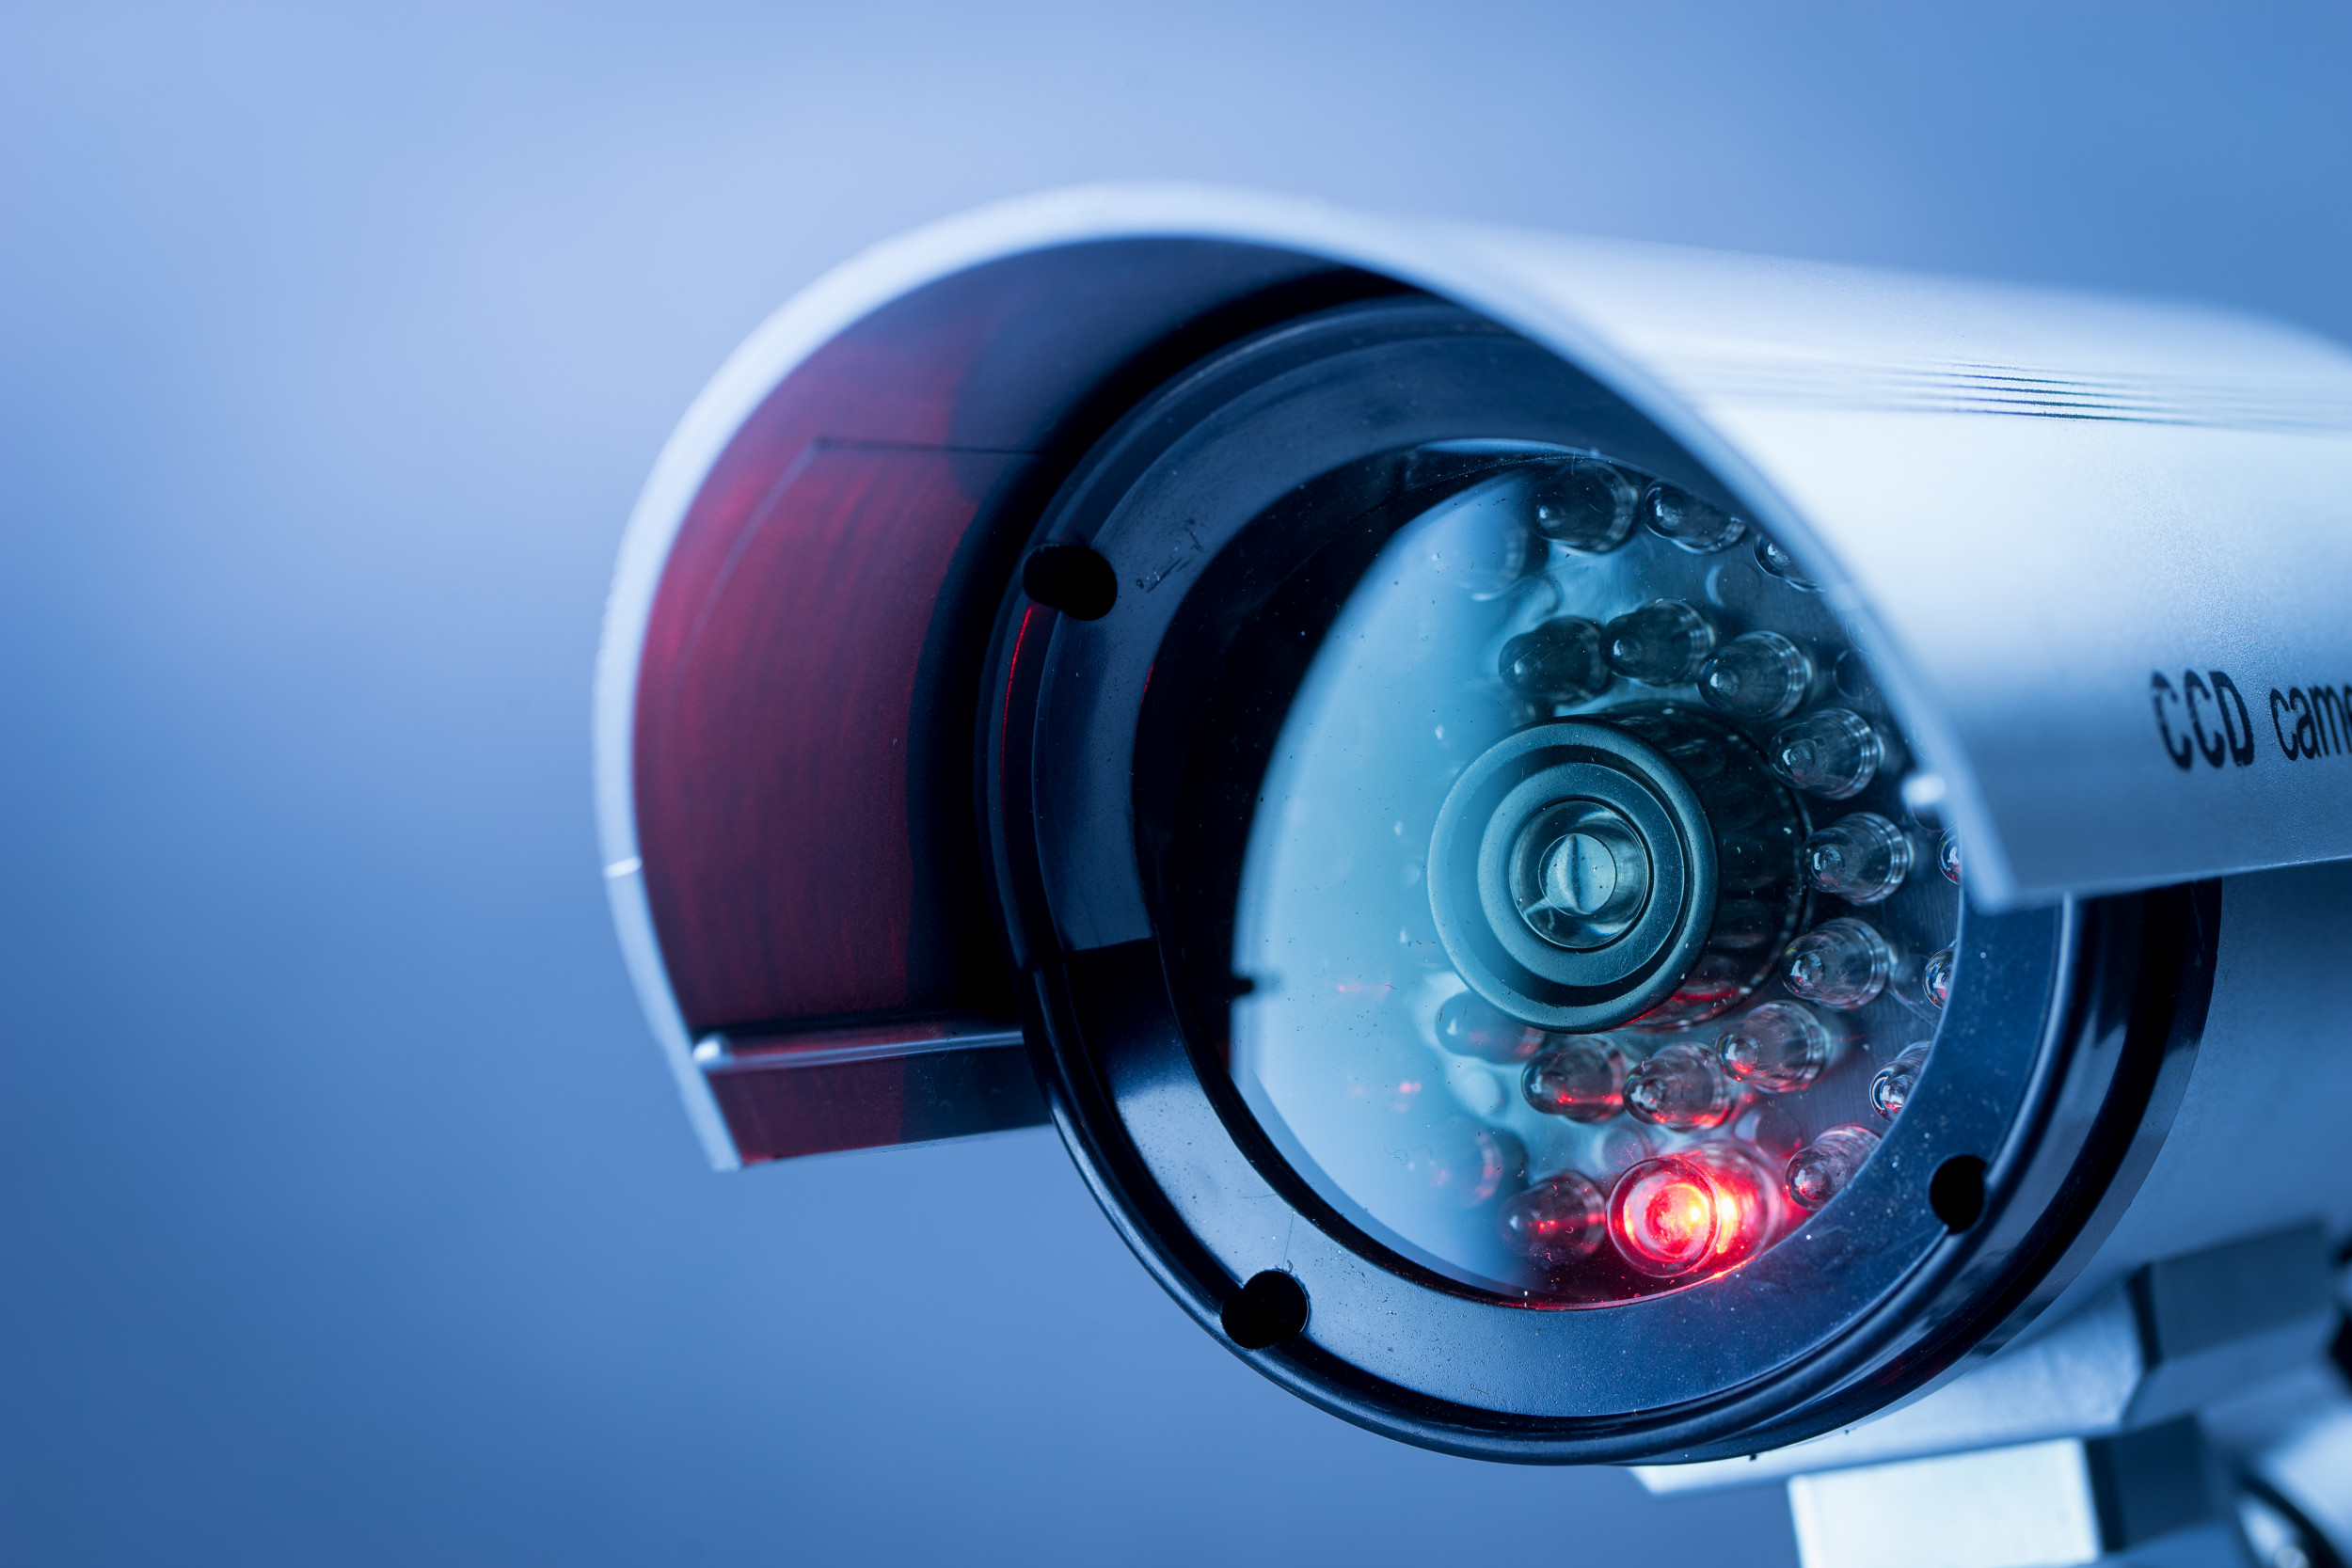 Hackers gained access to cameras